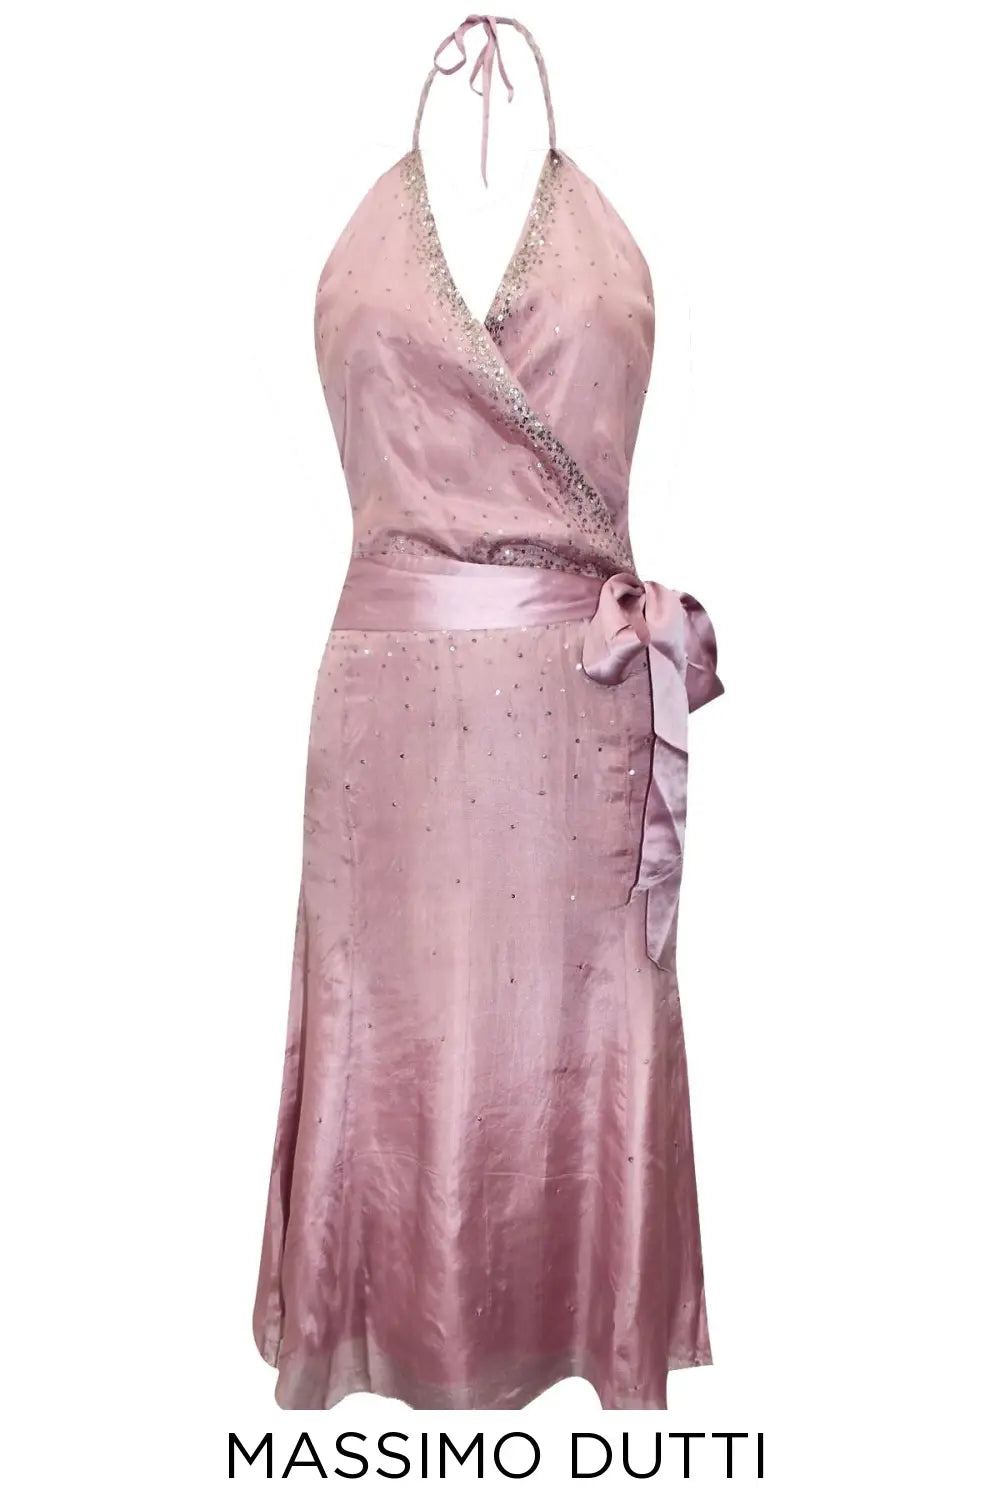 Massimo Dutti Pure Silk Sequin Beaded Party Dress Dusky Pink